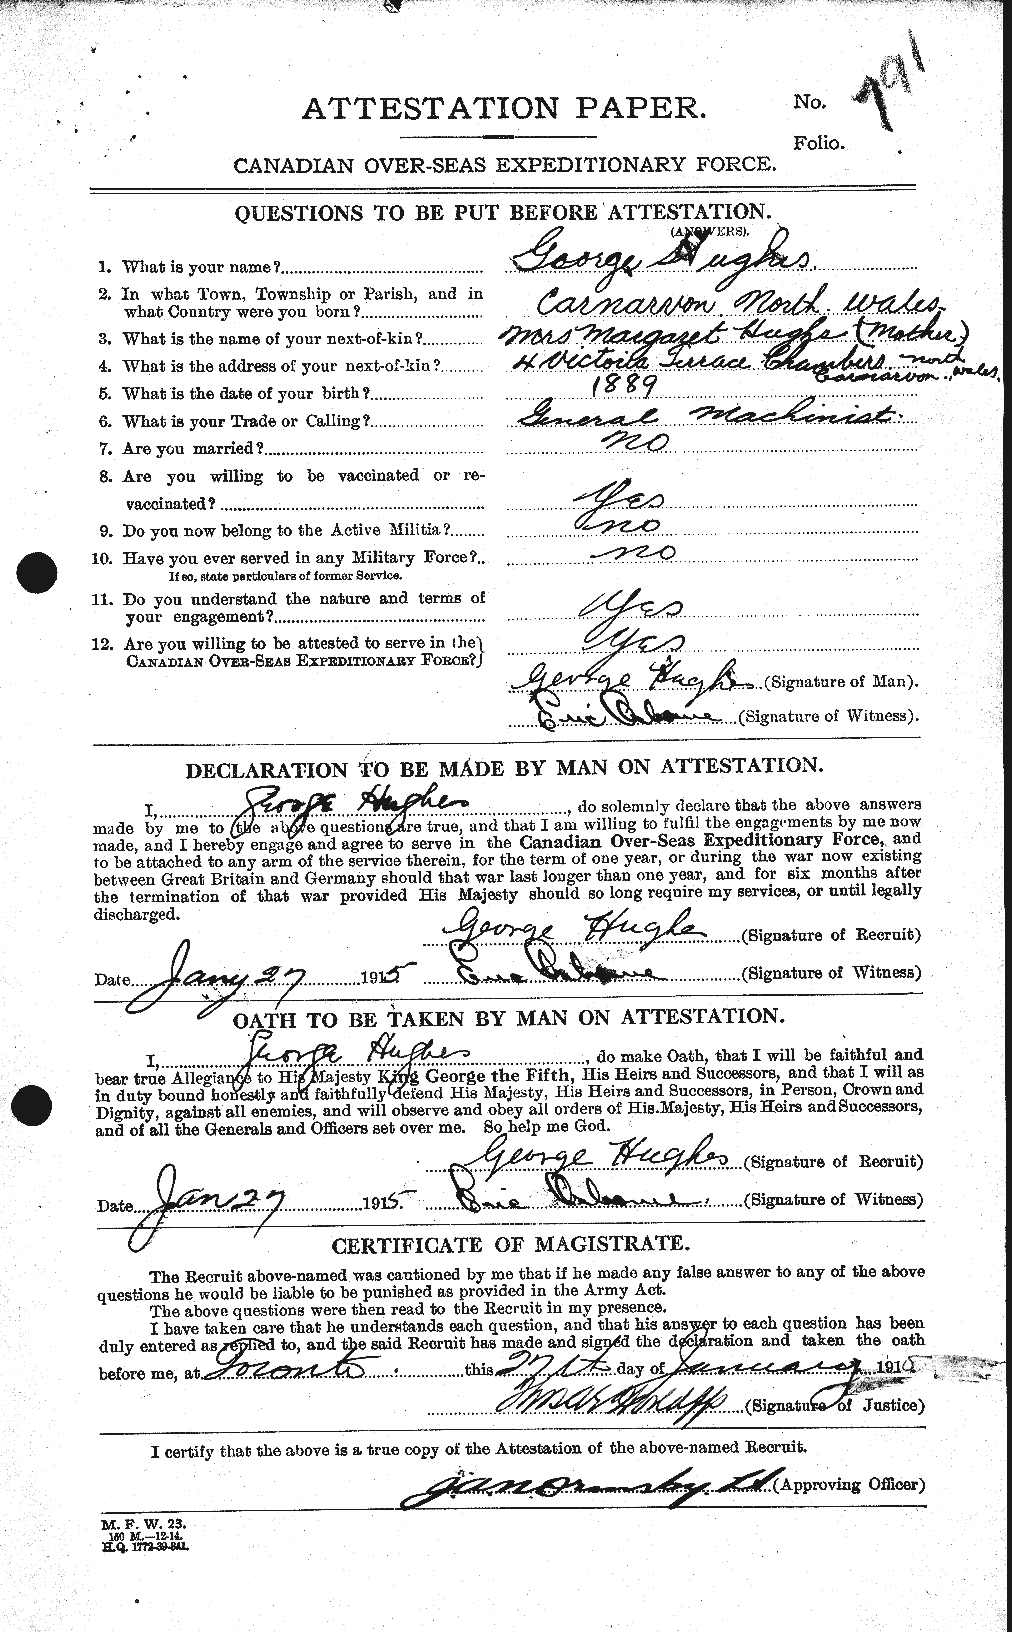 Personnel Records of the First World War - CEF 403816a